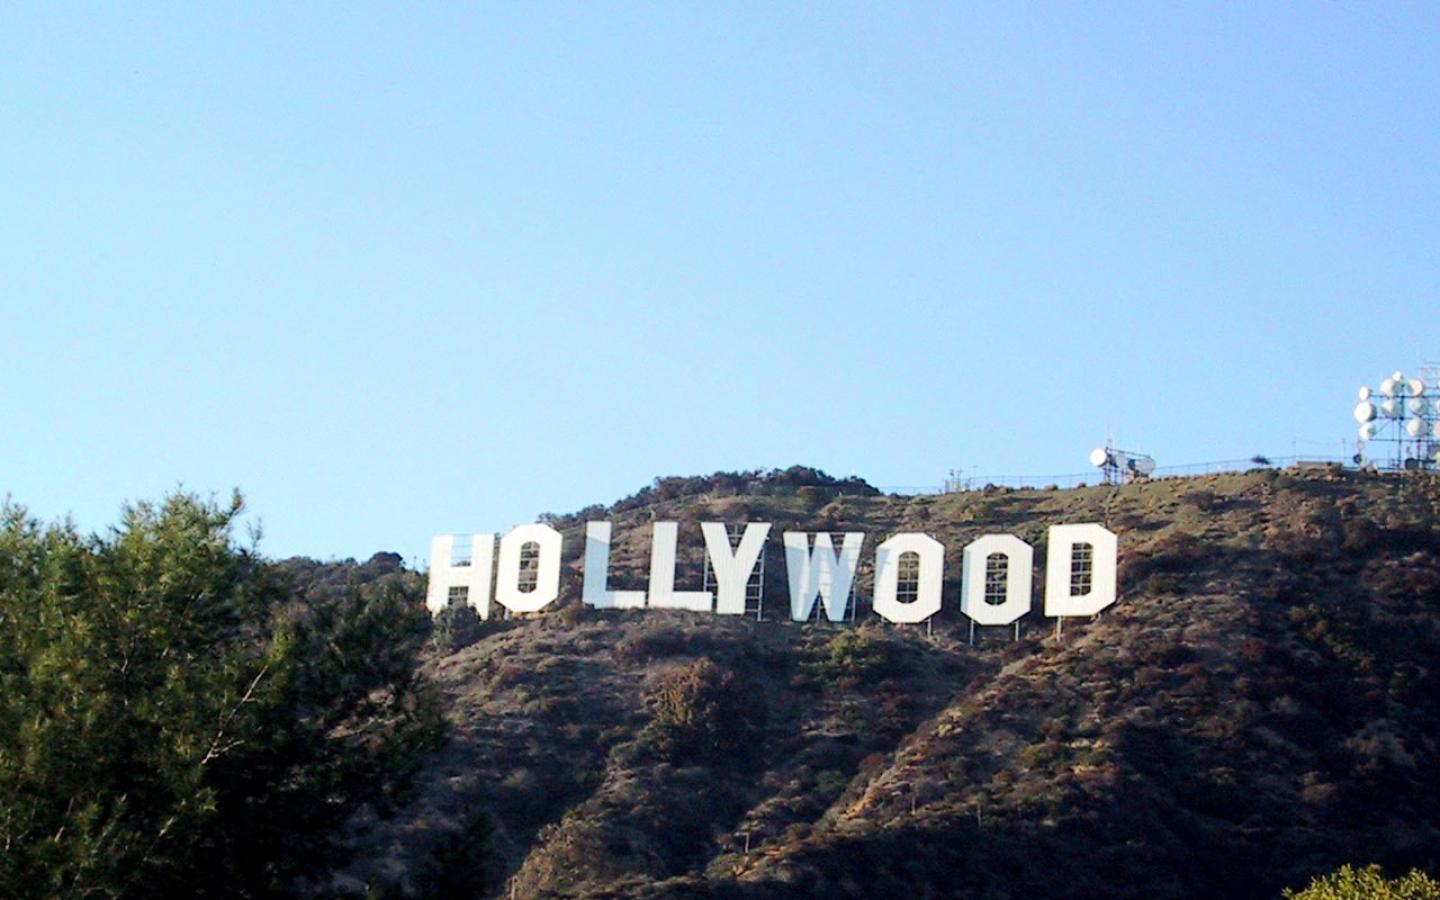 Los Angeles - Hollywood sign Wallpaper #2 1440 x 900 